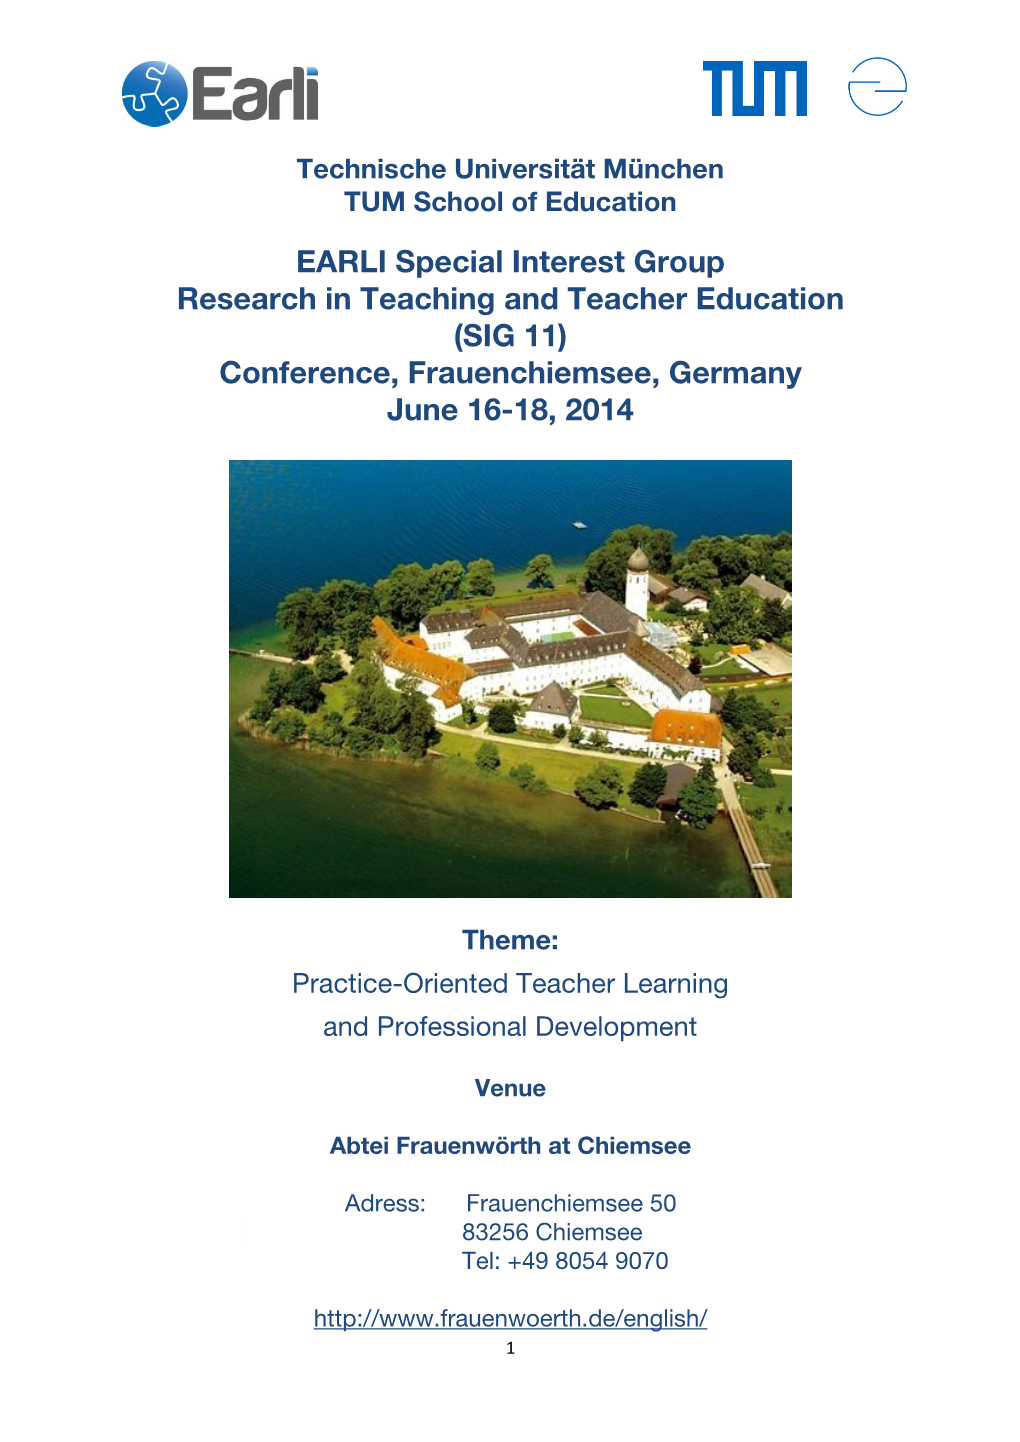 EARLI Special Interest Group Research in Teaching and Teacher Education (SIG 11) Conference, Frauenchiemsee, Germany June 16-18, 2014